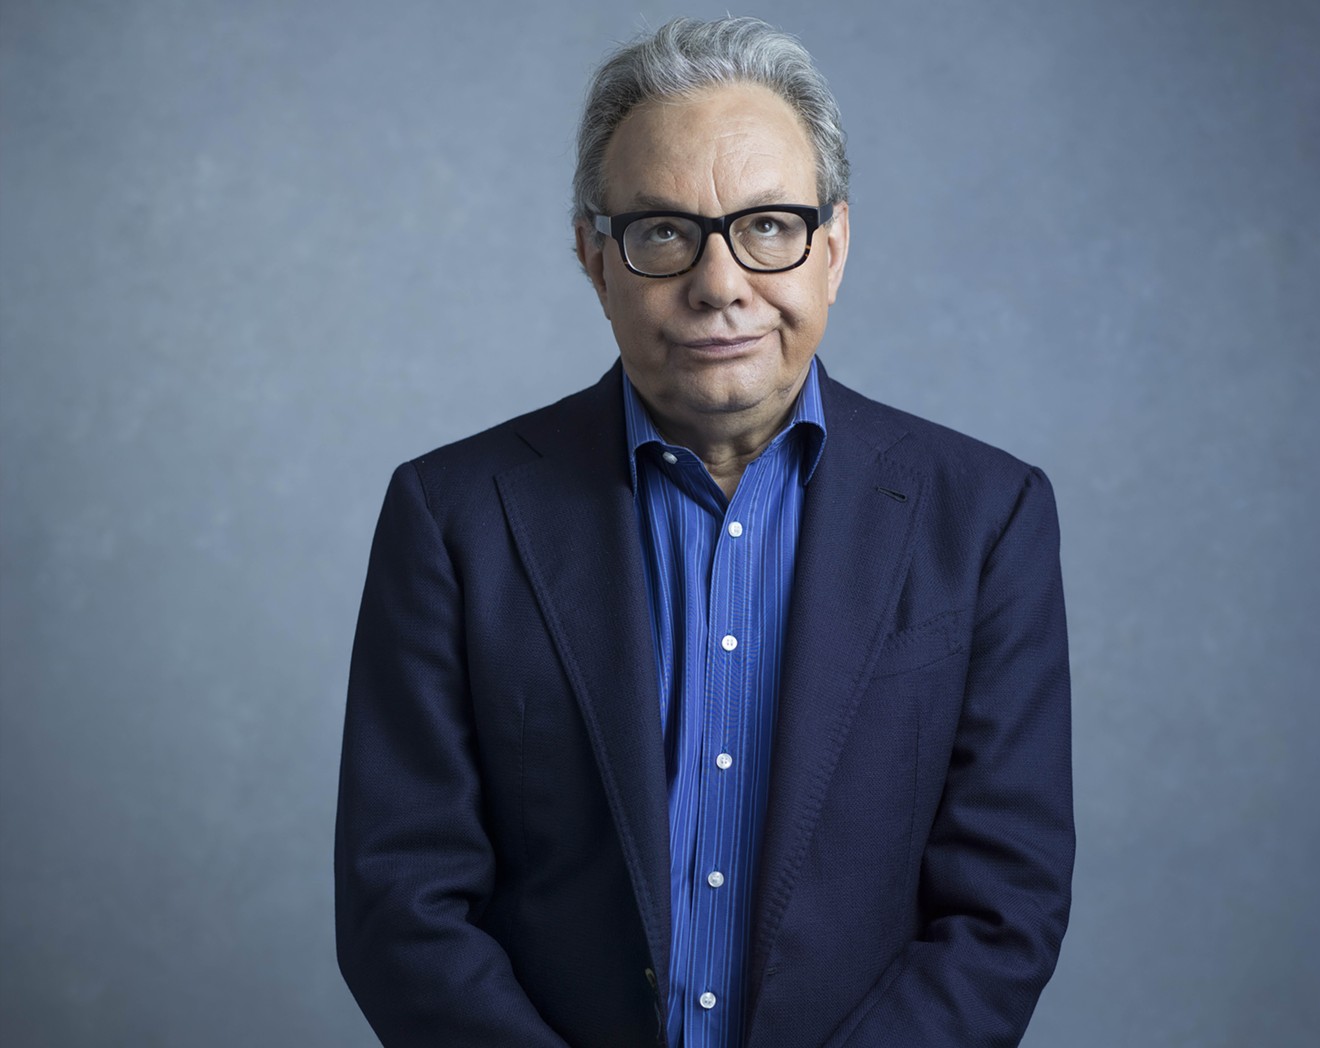 Lewis Black performs at Paramount on Friday, February 2.